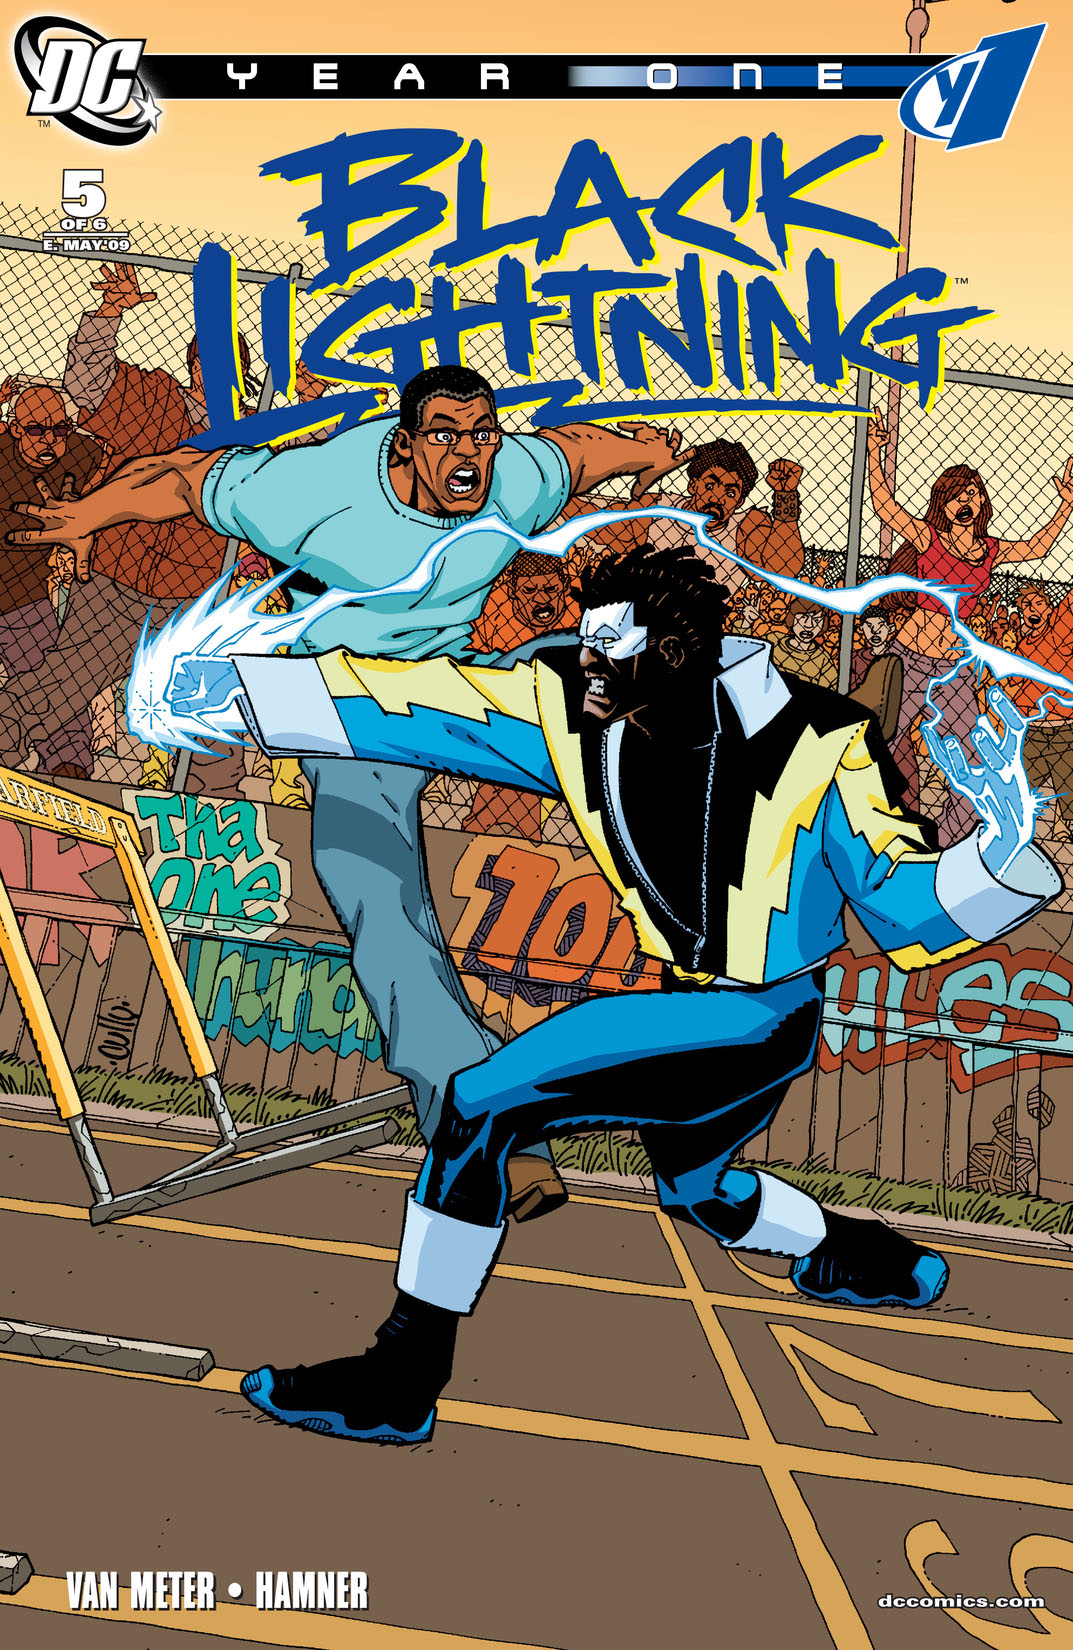 Black Lightning: Year One #5 preview images